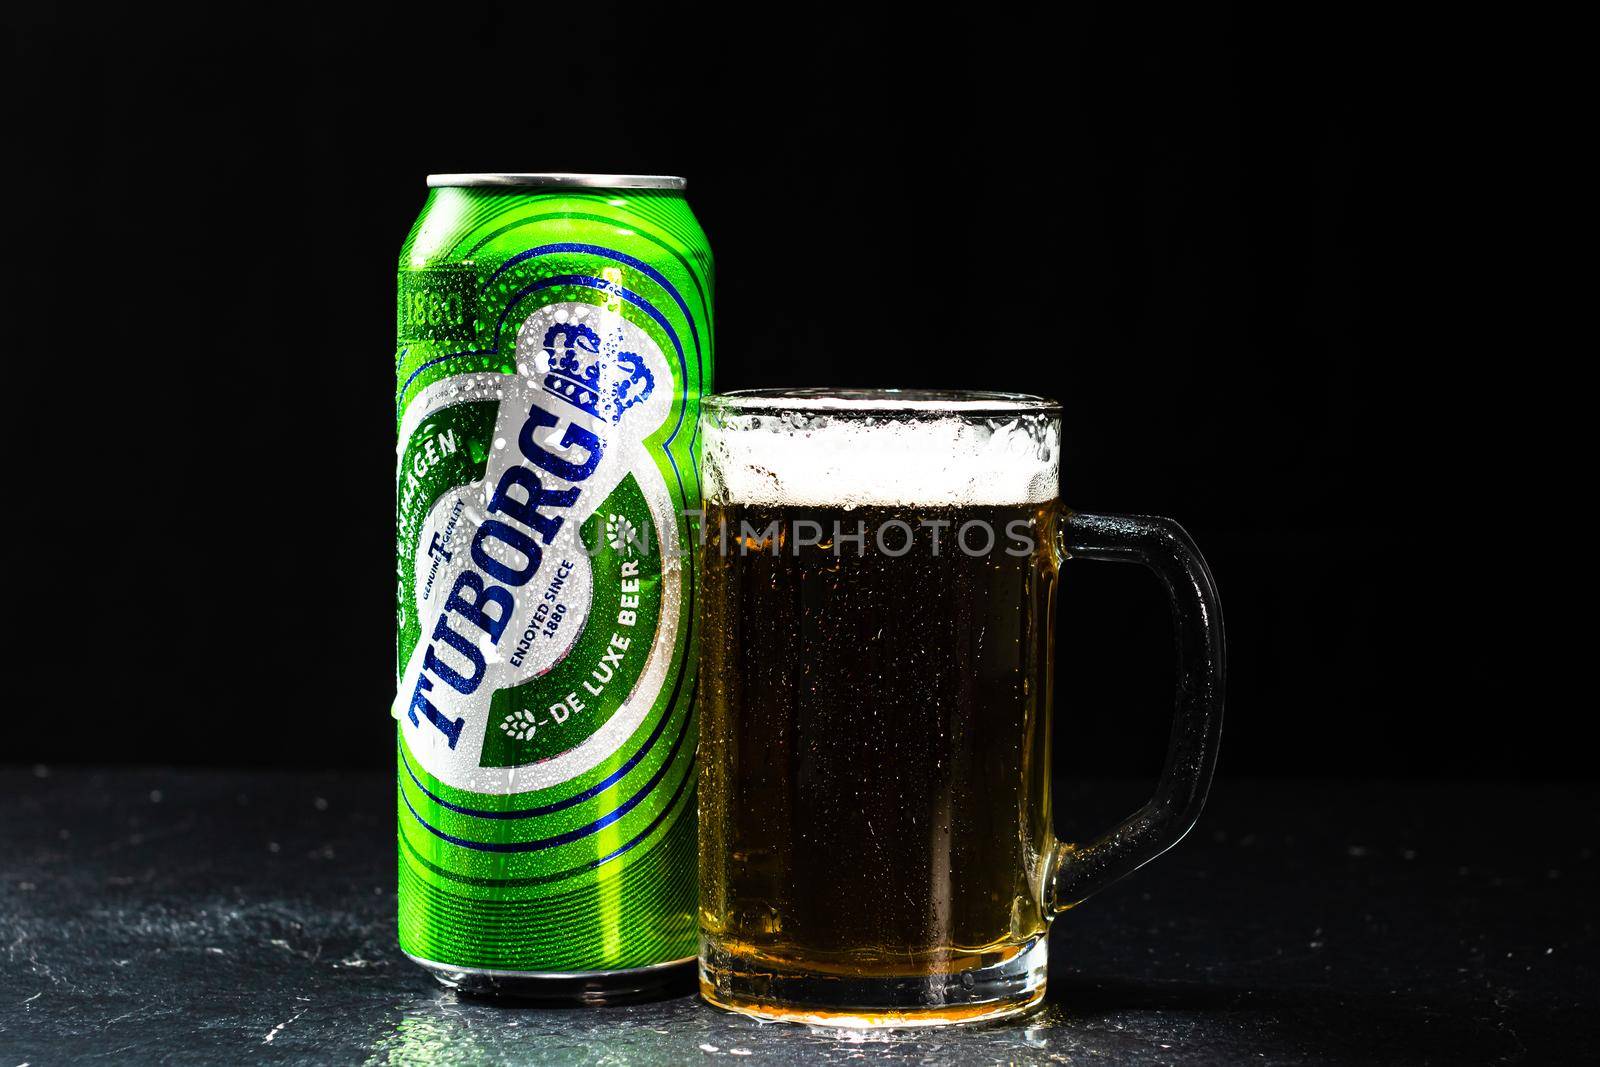 Can of Tuborg beer and beer glass on dark background. Illustrative editorial photo shot in Bucharest, Romania, 2021 by vladispas